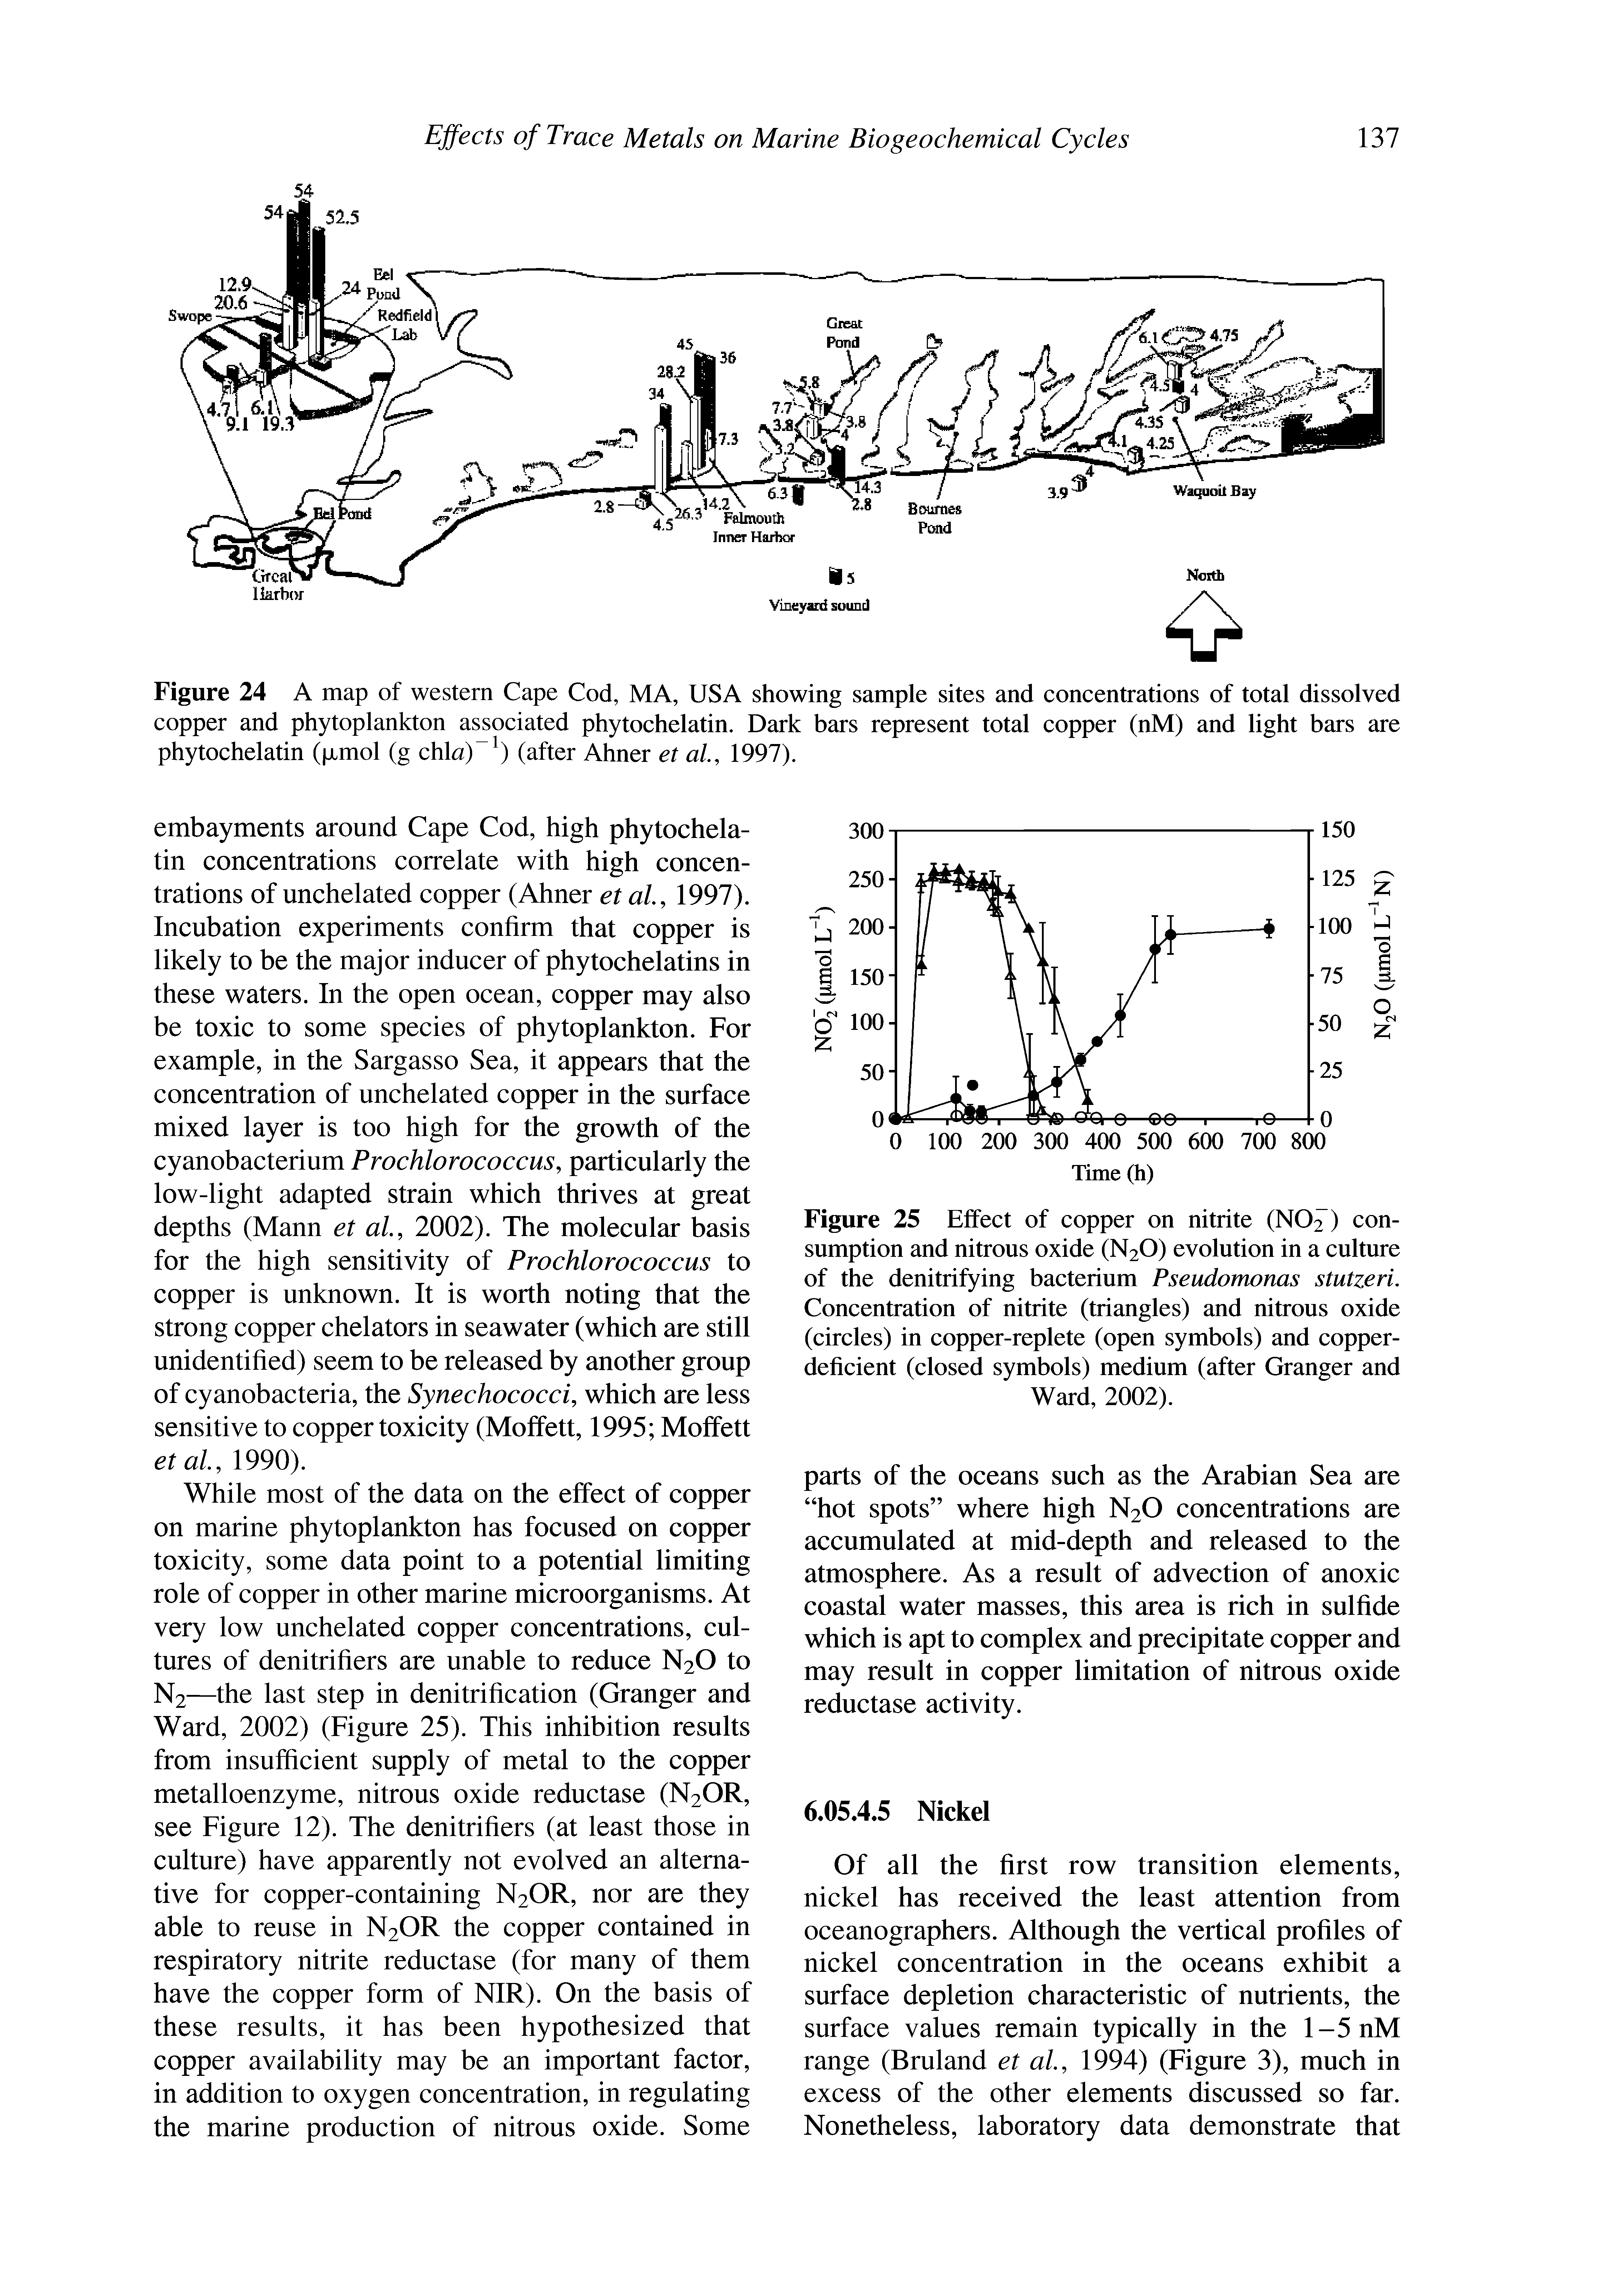 Figure 25 Effect of copper on nitrite (NO2) consumption and nitrous oxide (N2O) evolution in a culture of the denitrifying bacterium Pseudomonas stutzeri. Concentration of nitrite (triangles) and nitrous oxide (circles) in copper-replete (open symbols) and copper-deficient (closed symbols) medium (after Granger and Ward, 2002).